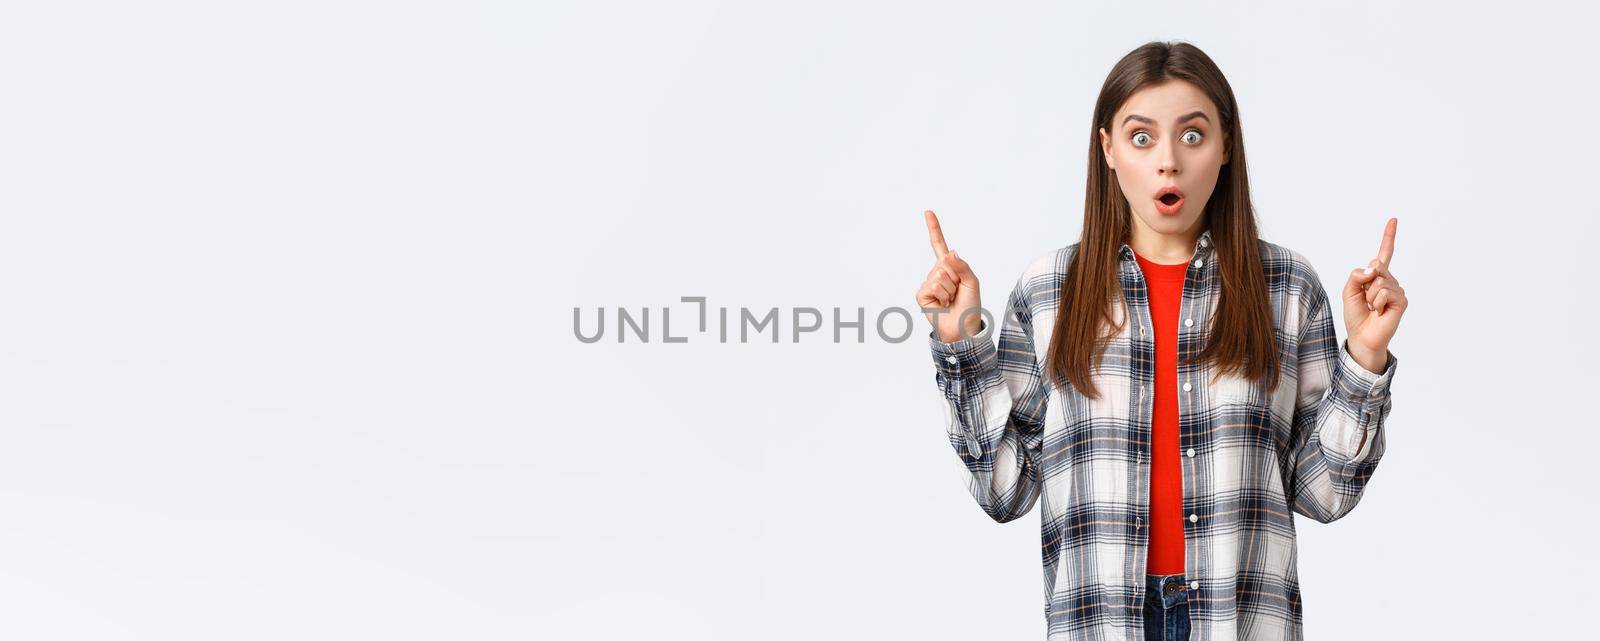 Lifestyle, different emotions, leisure activities concept. Astonished and speechless attractive girl in checked shirt pointing fingers up to tell news, drop jaw staring, make wow expression.